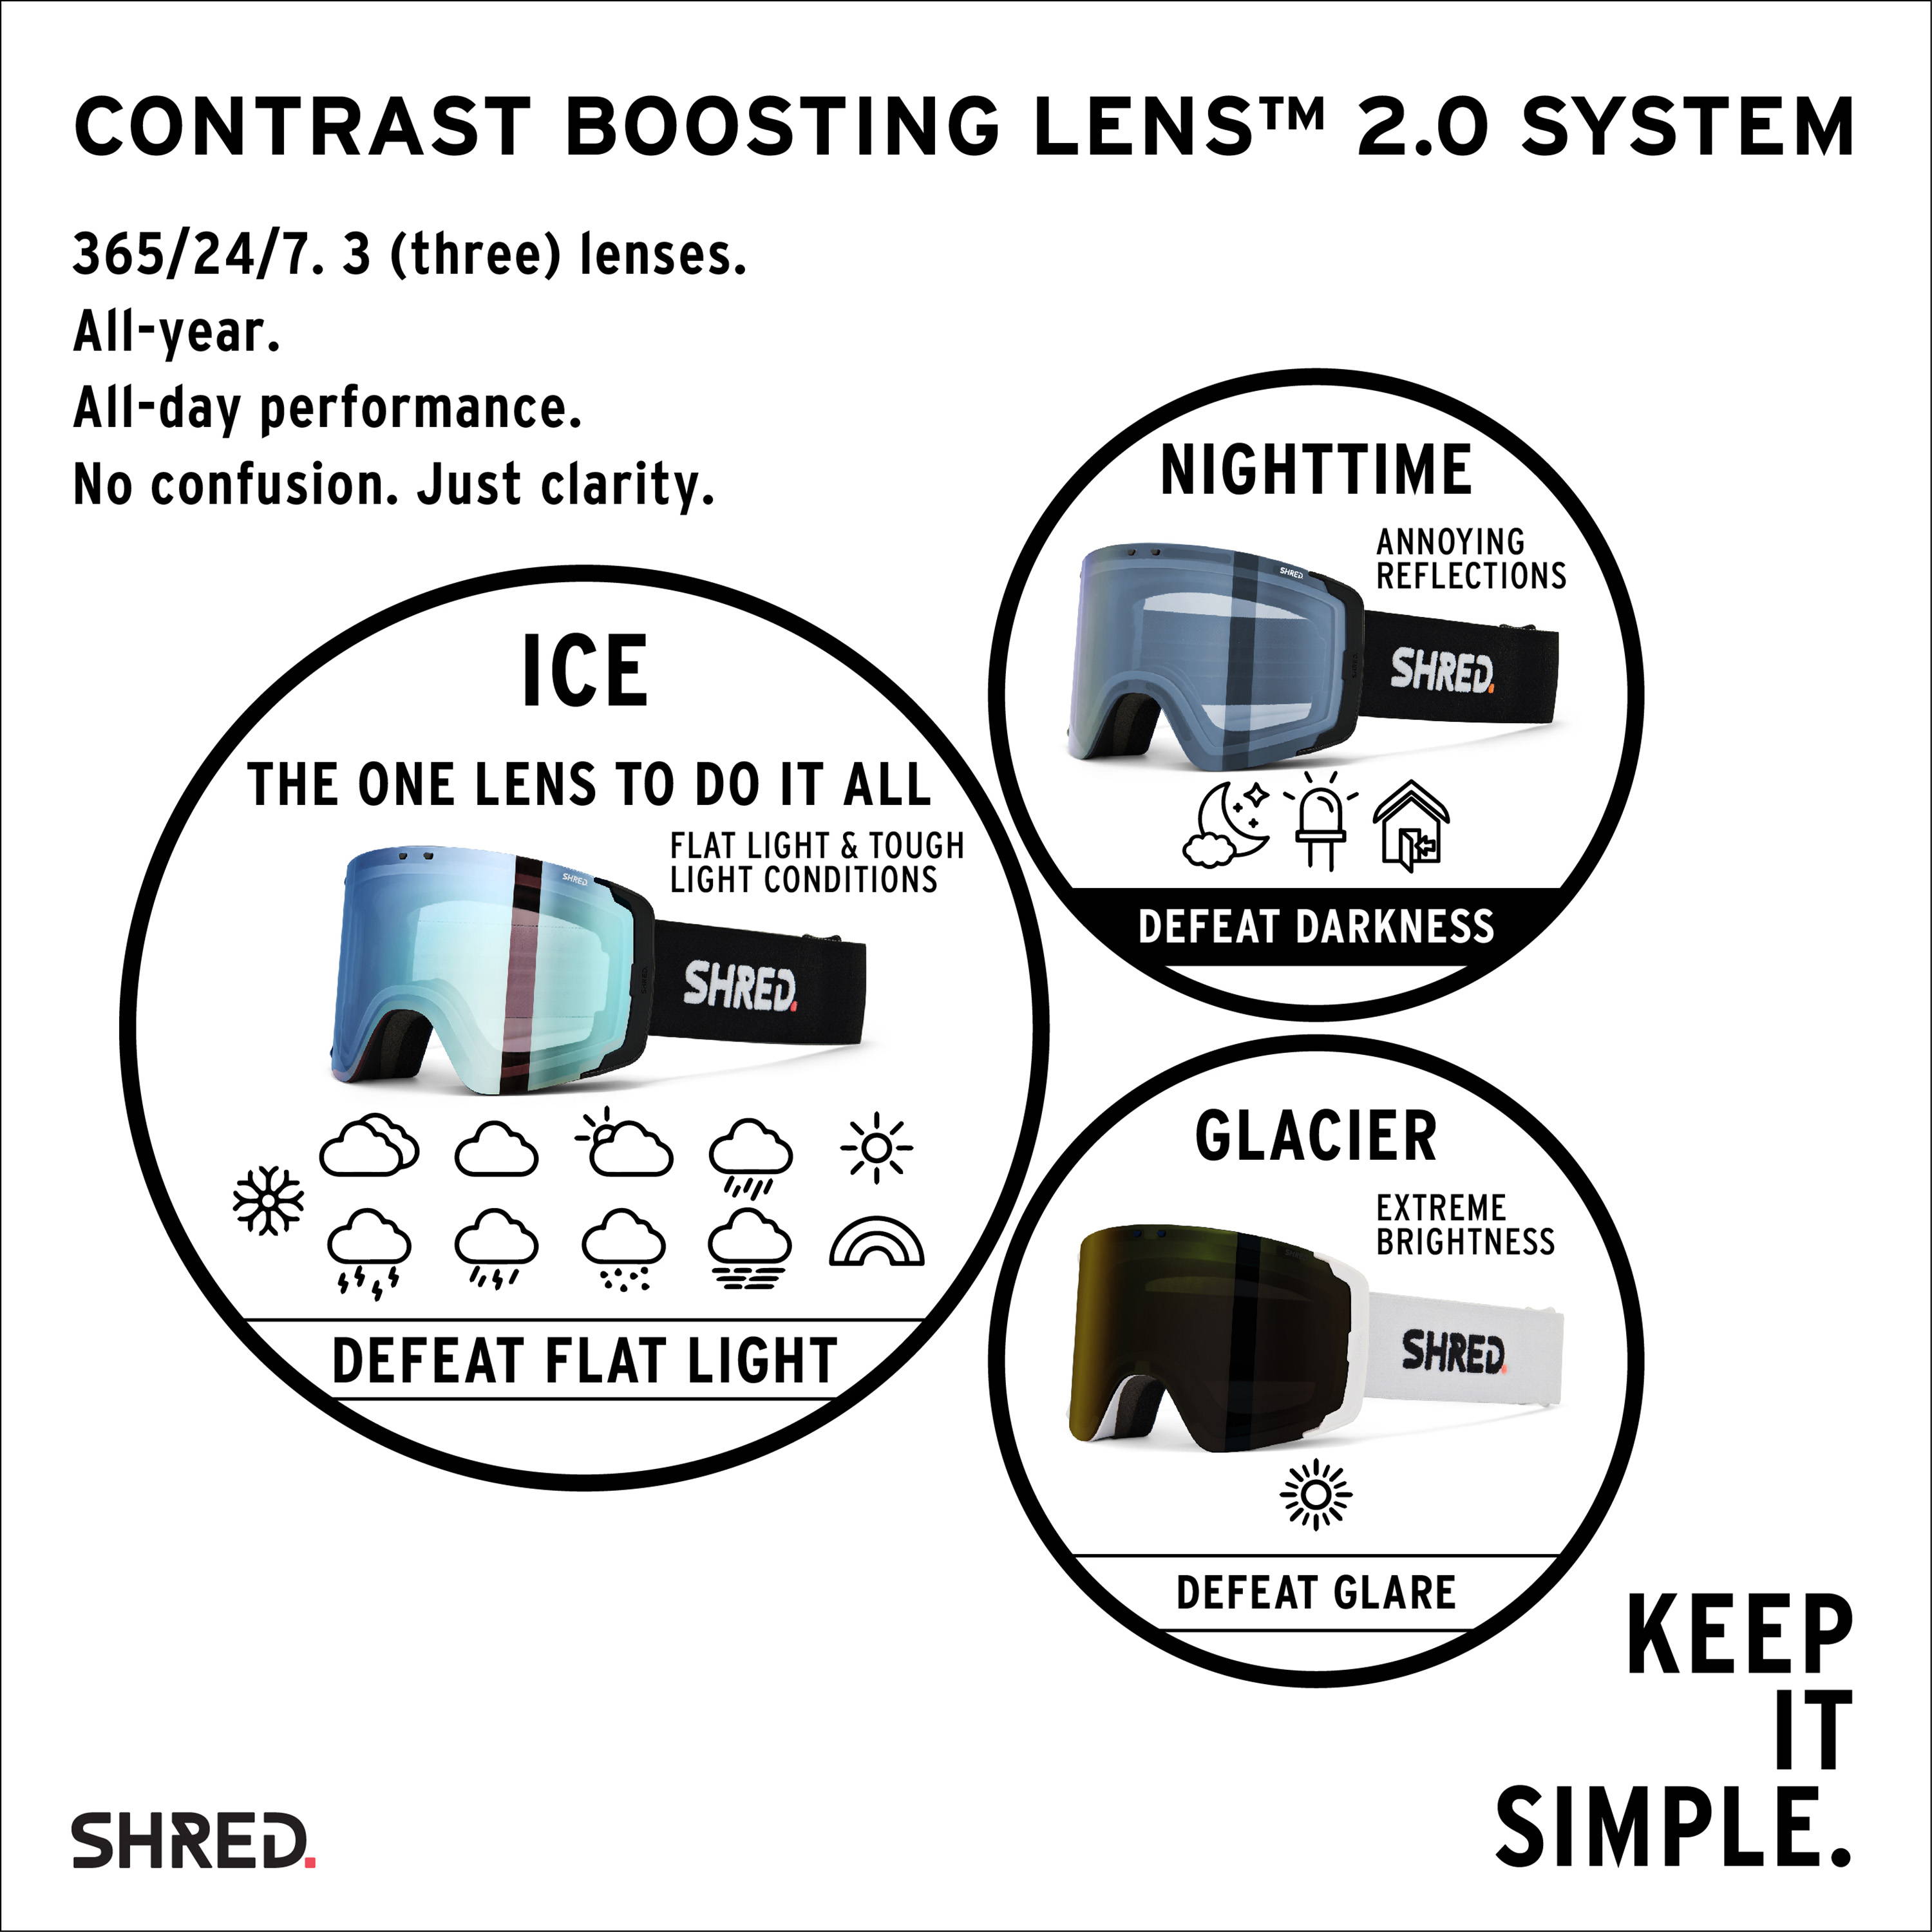 SHRED. Contrast Boosting Lens 2.0 System in a nutshell